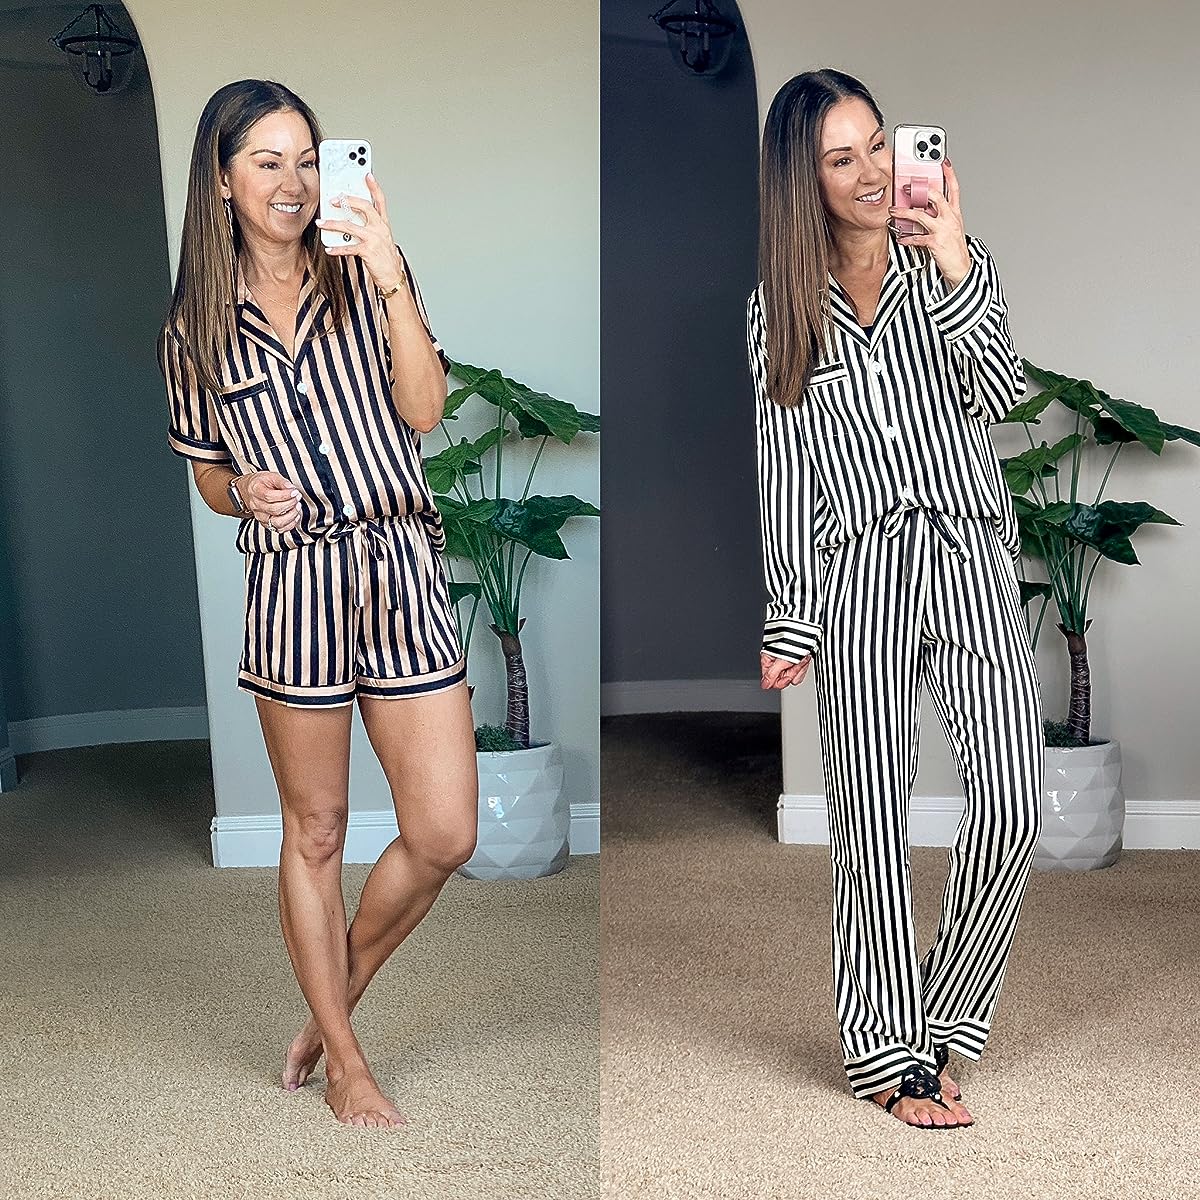 The Best loungewear and cozy finds for this fall | #cozy #loungewear #finds #fall #autumn #pajama #sets #satin #amazon #sandals #best #toryburch